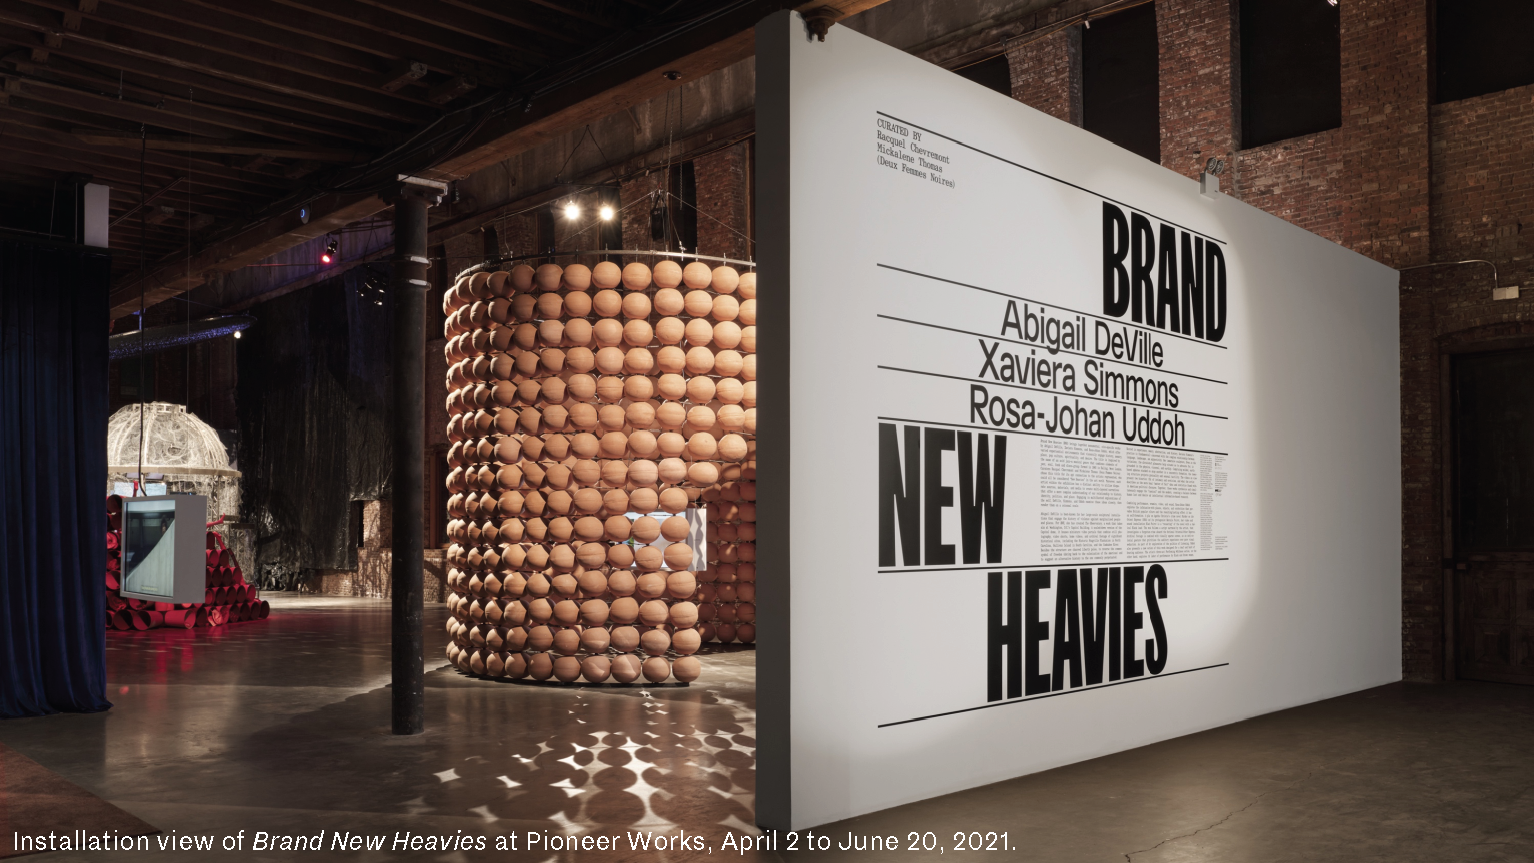 Brand New Heavies, an exhibit previously on view at Pioneer Works in 2021 curated by Deux Femmes Noires founders Mickalene Thomas and Racquel Chevremont. 